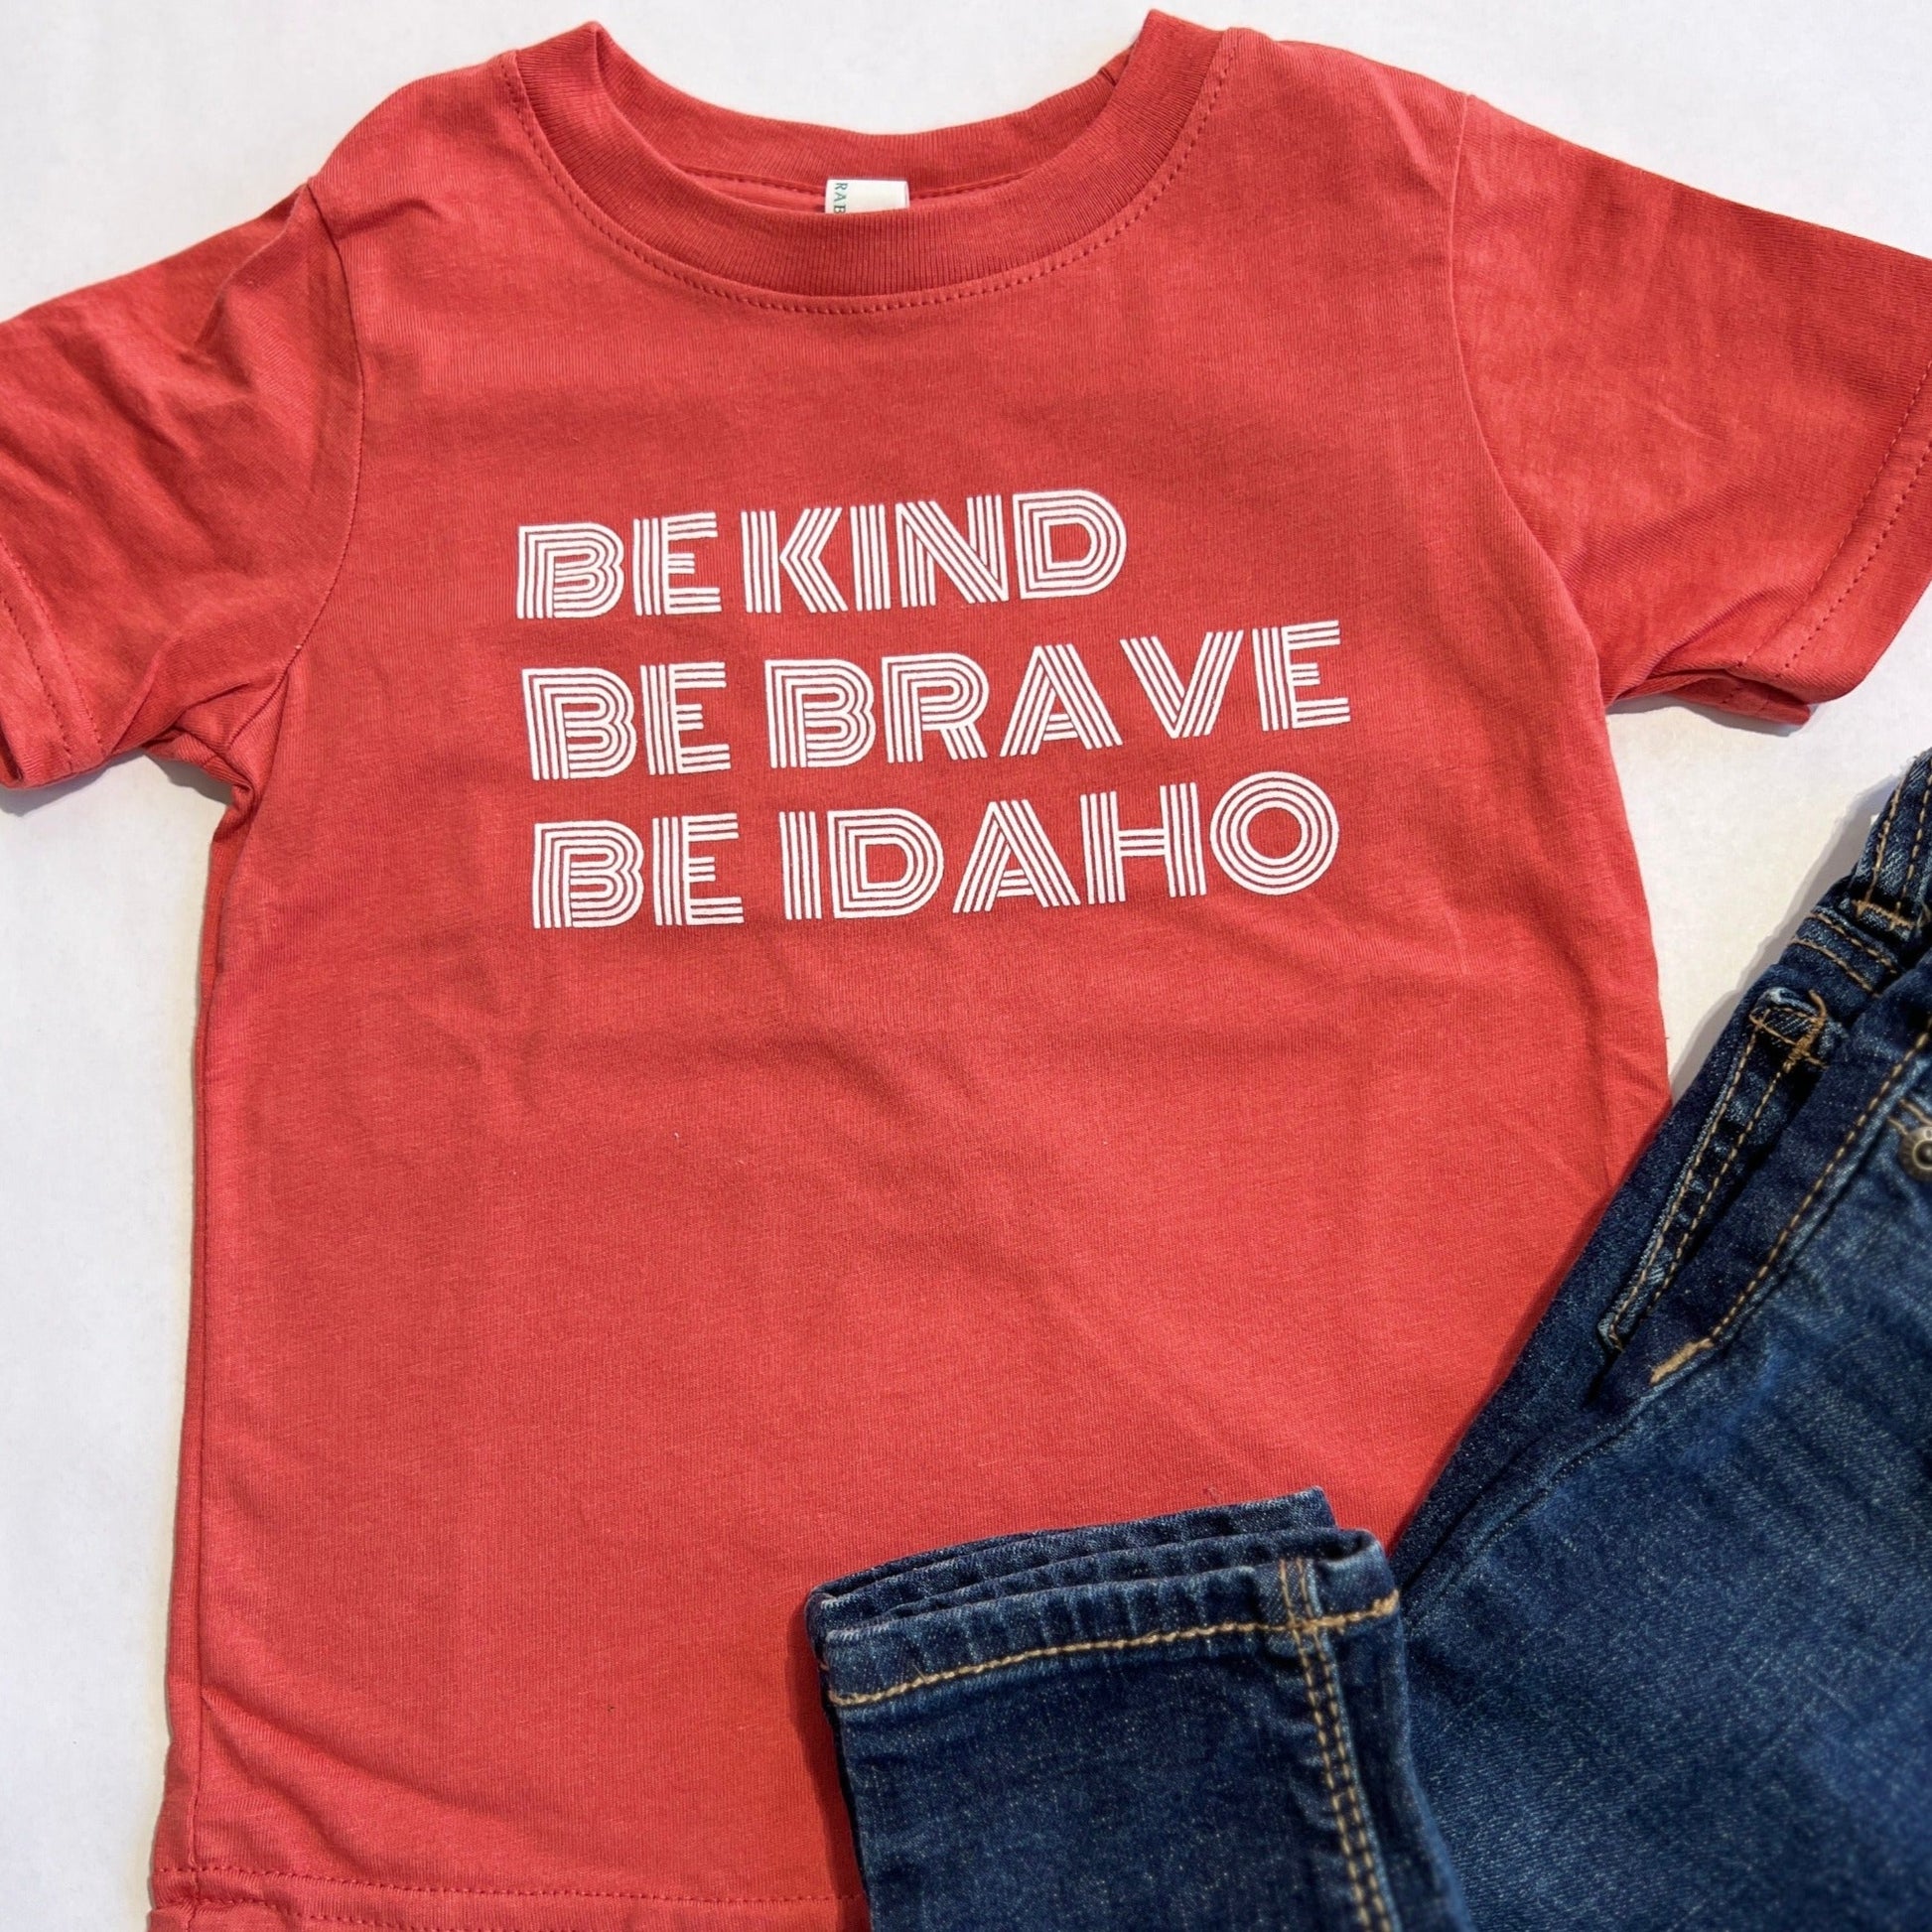 This Idaho T shirt represents all the things we love about Idaho. It showcases the love for Idaho and how amazing Idaho is. Idaho T shirts are cozy and comfy, durable. Each t shirt is screen printed right here in Idaho.